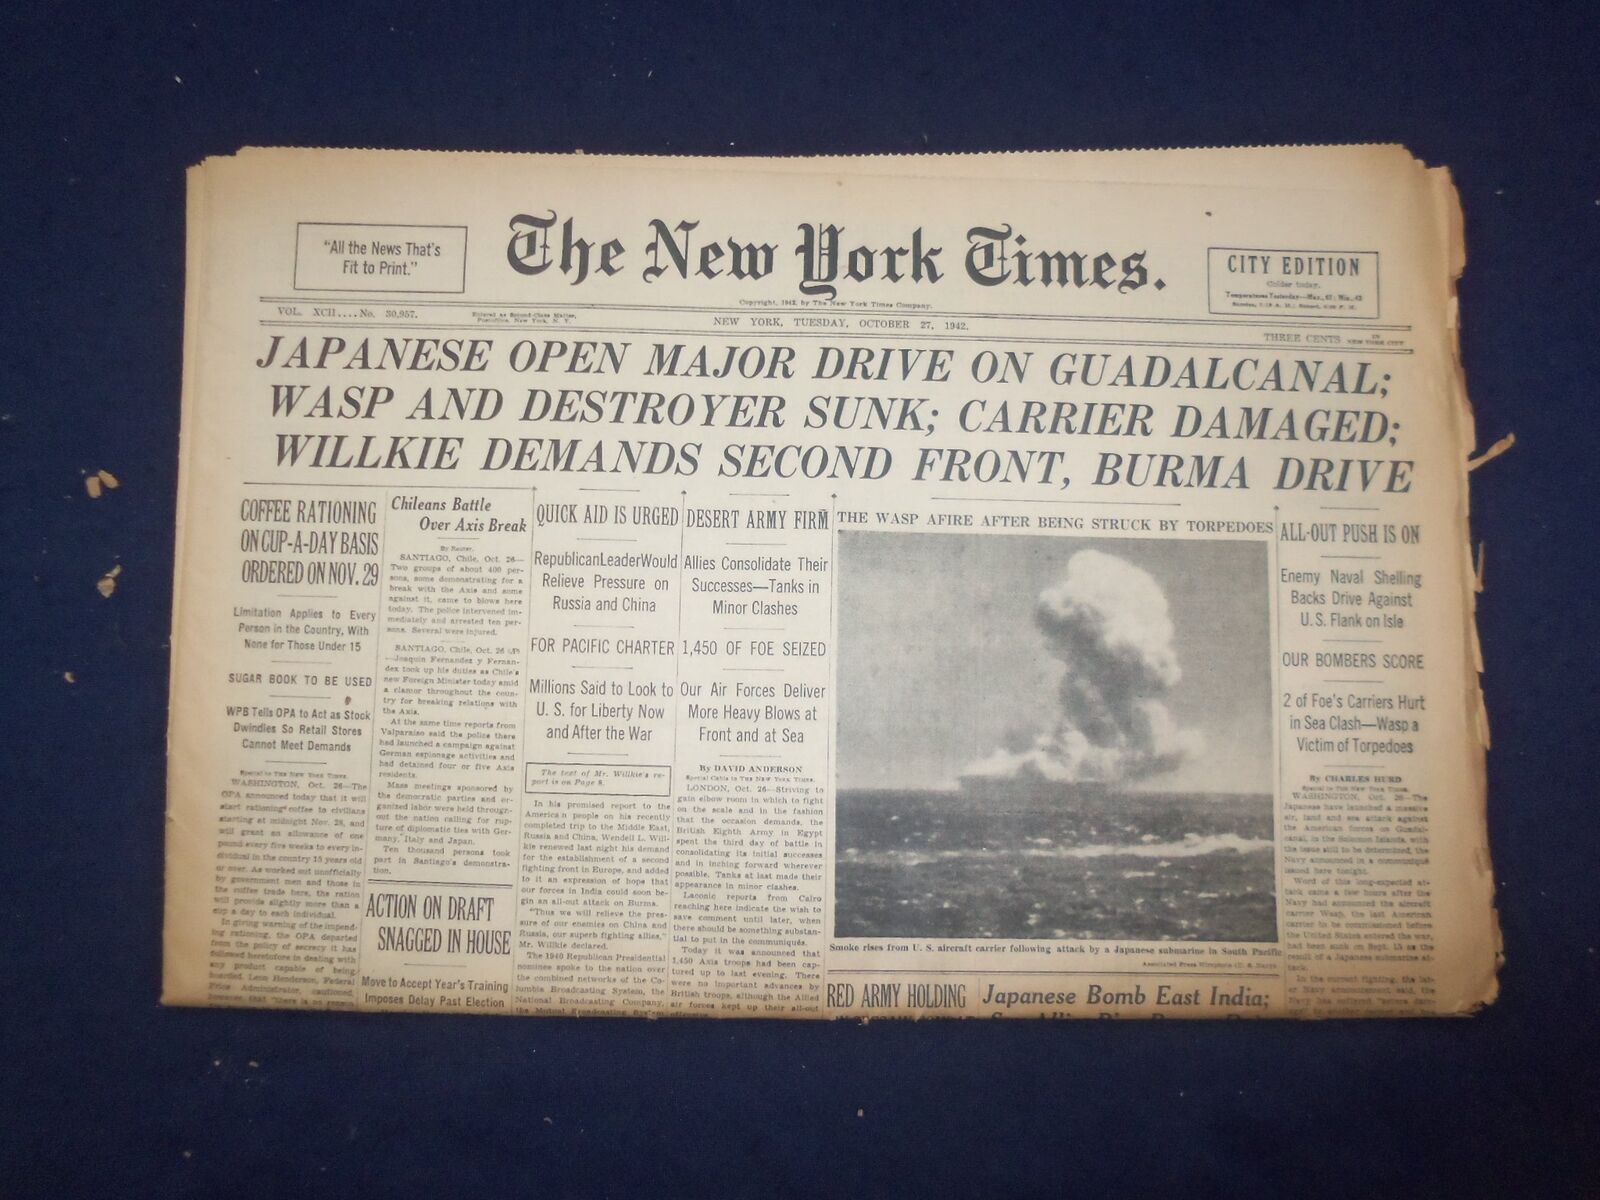 1942 OCT 27 NEW YORK TIMES - JAPANESE OPEN MAJOR DRIVE ON GUADALCANAL - NP 6510